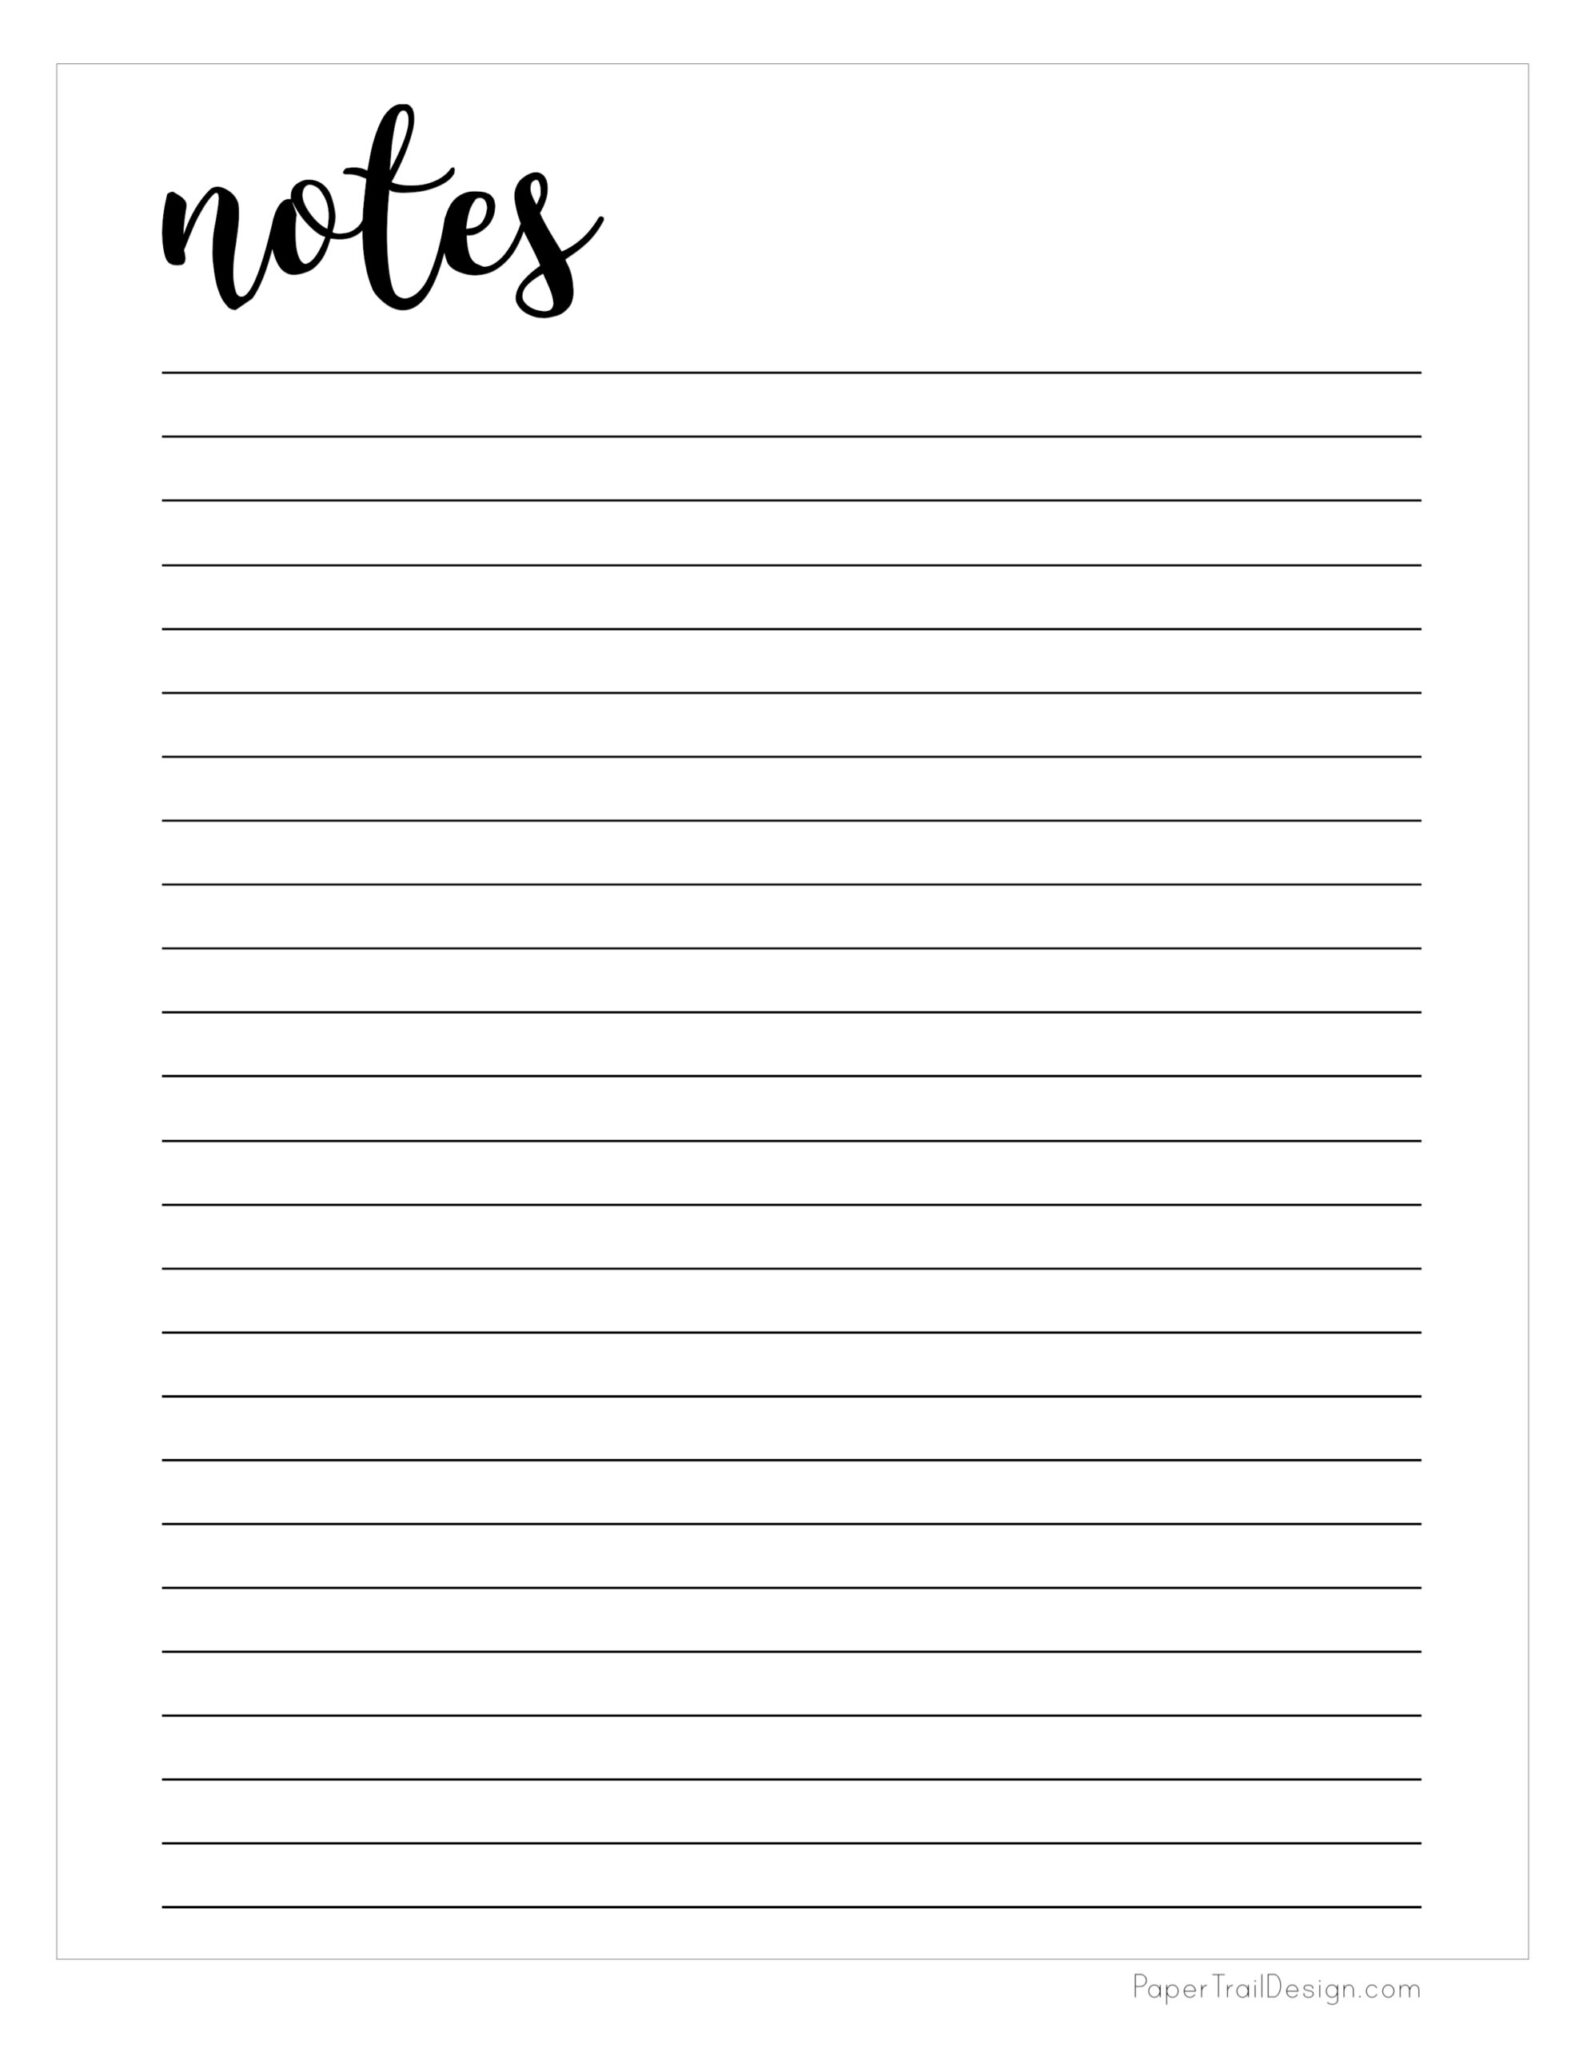 Free Printable Notes Template Paper Trail Design Printable Notes - Riset